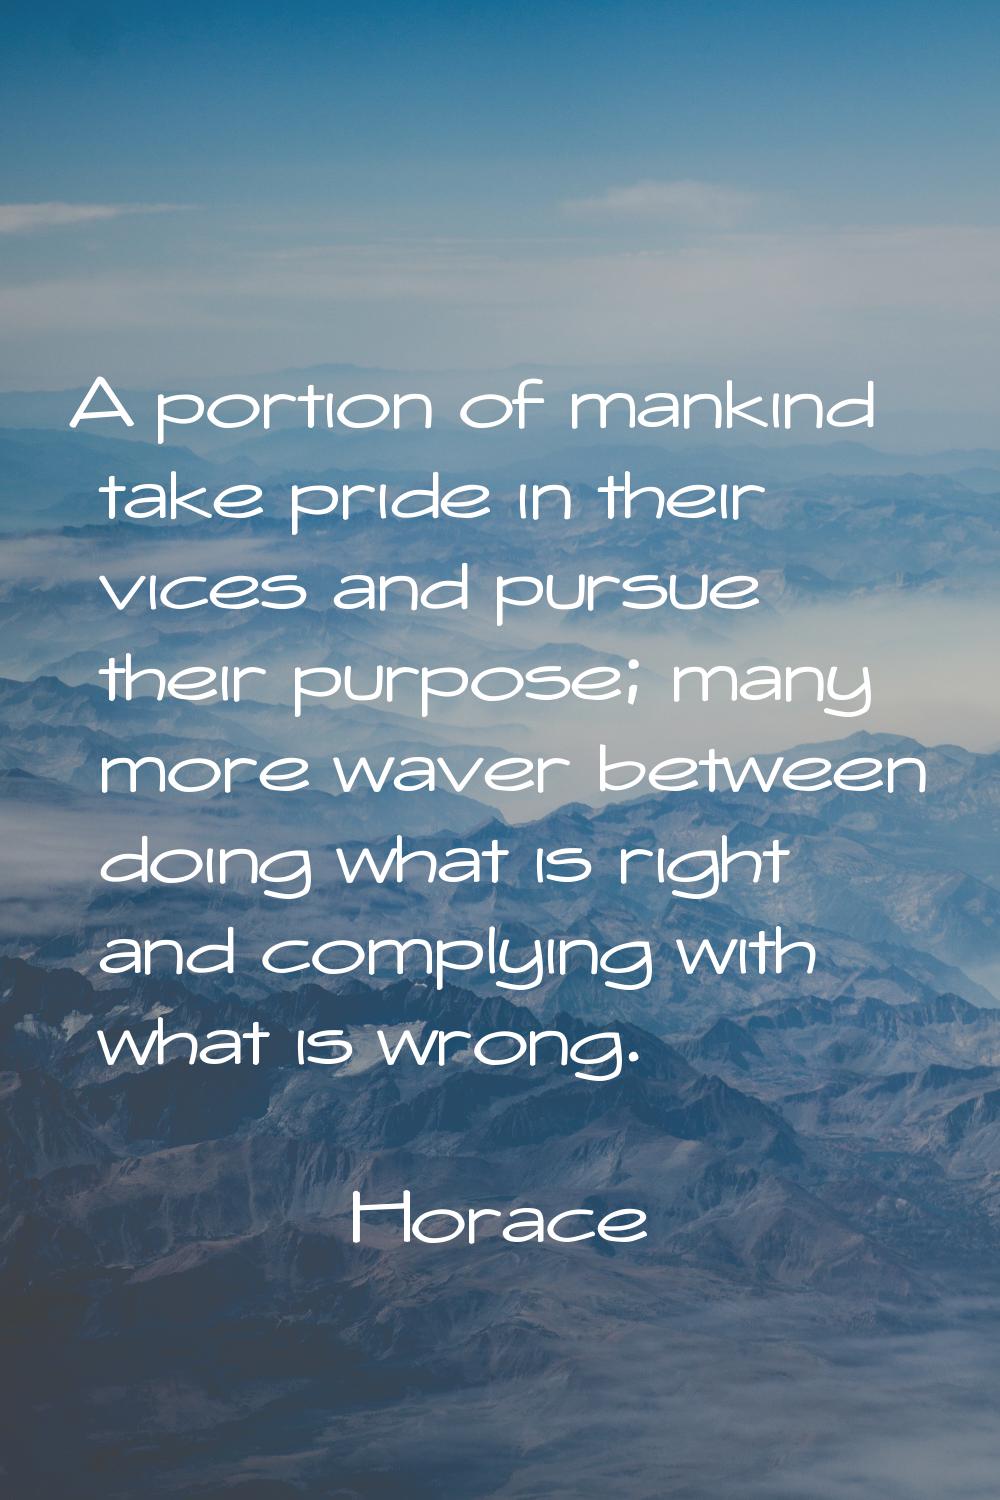 A portion of mankind take pride in their vices and pursue their purpose; many more waver between do